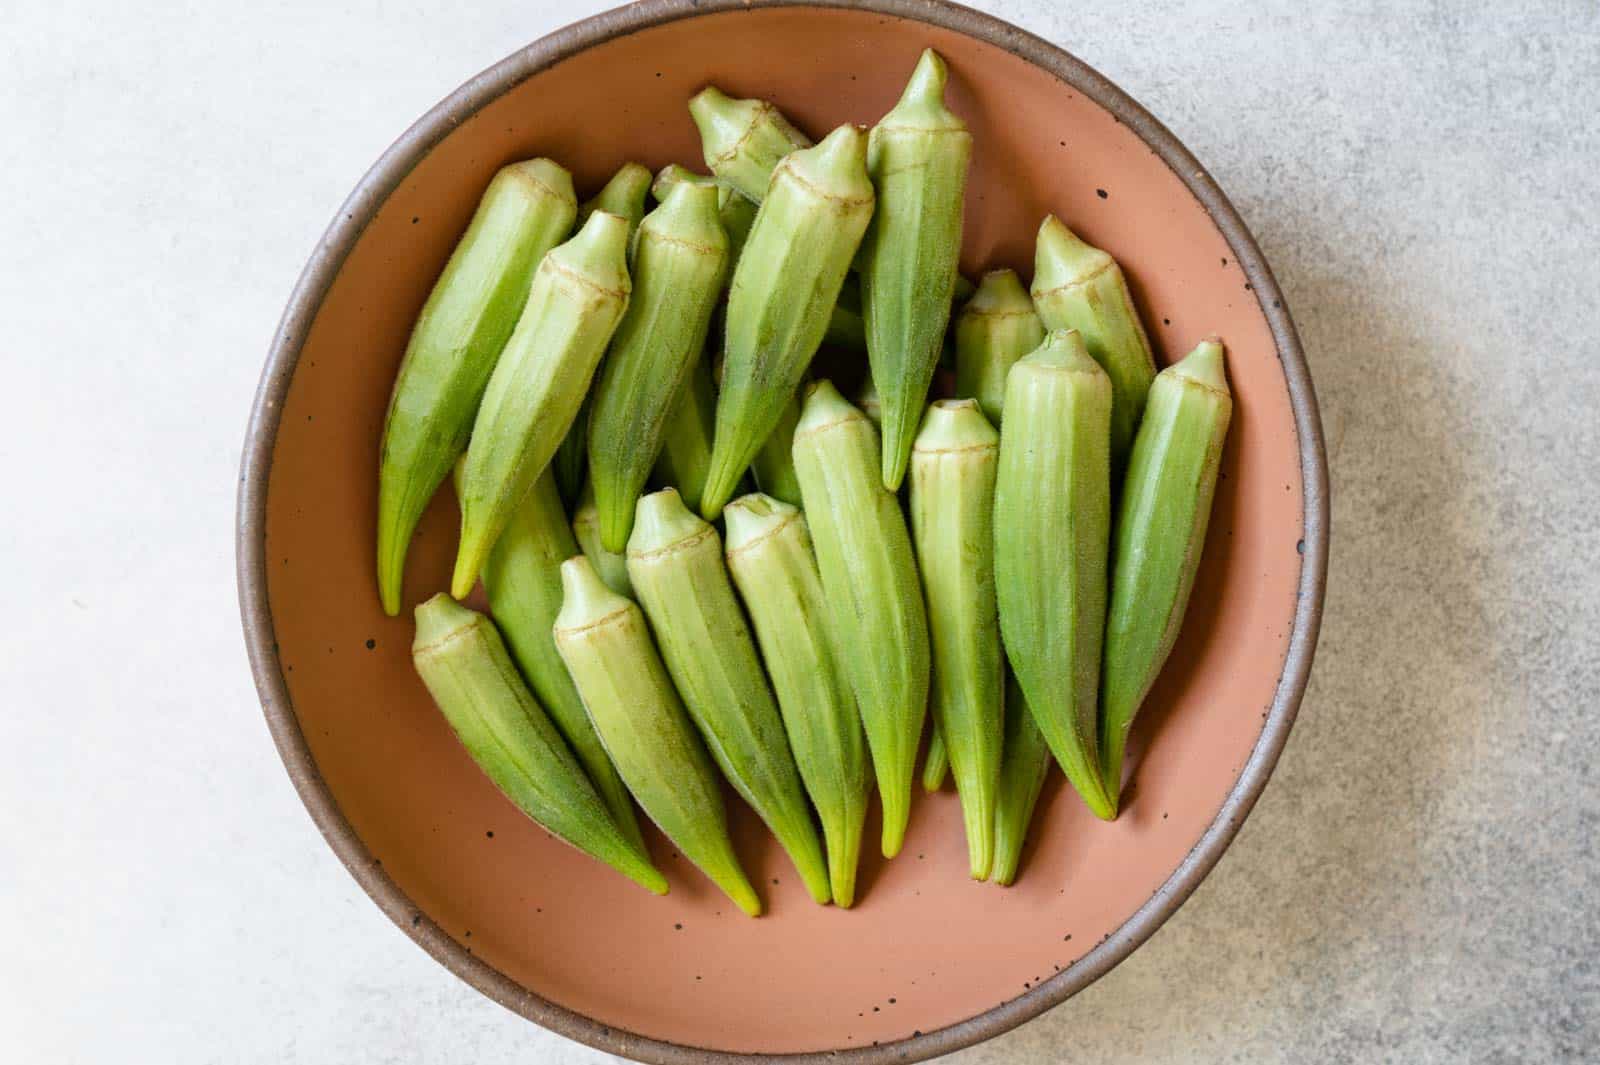 Okra in a bowl for July produce guide July Produce Guide | Healthy Nibbles by Lisa Lin July Produce Guide | Healthy Nibbles by Lisa Lin Okra Landscape